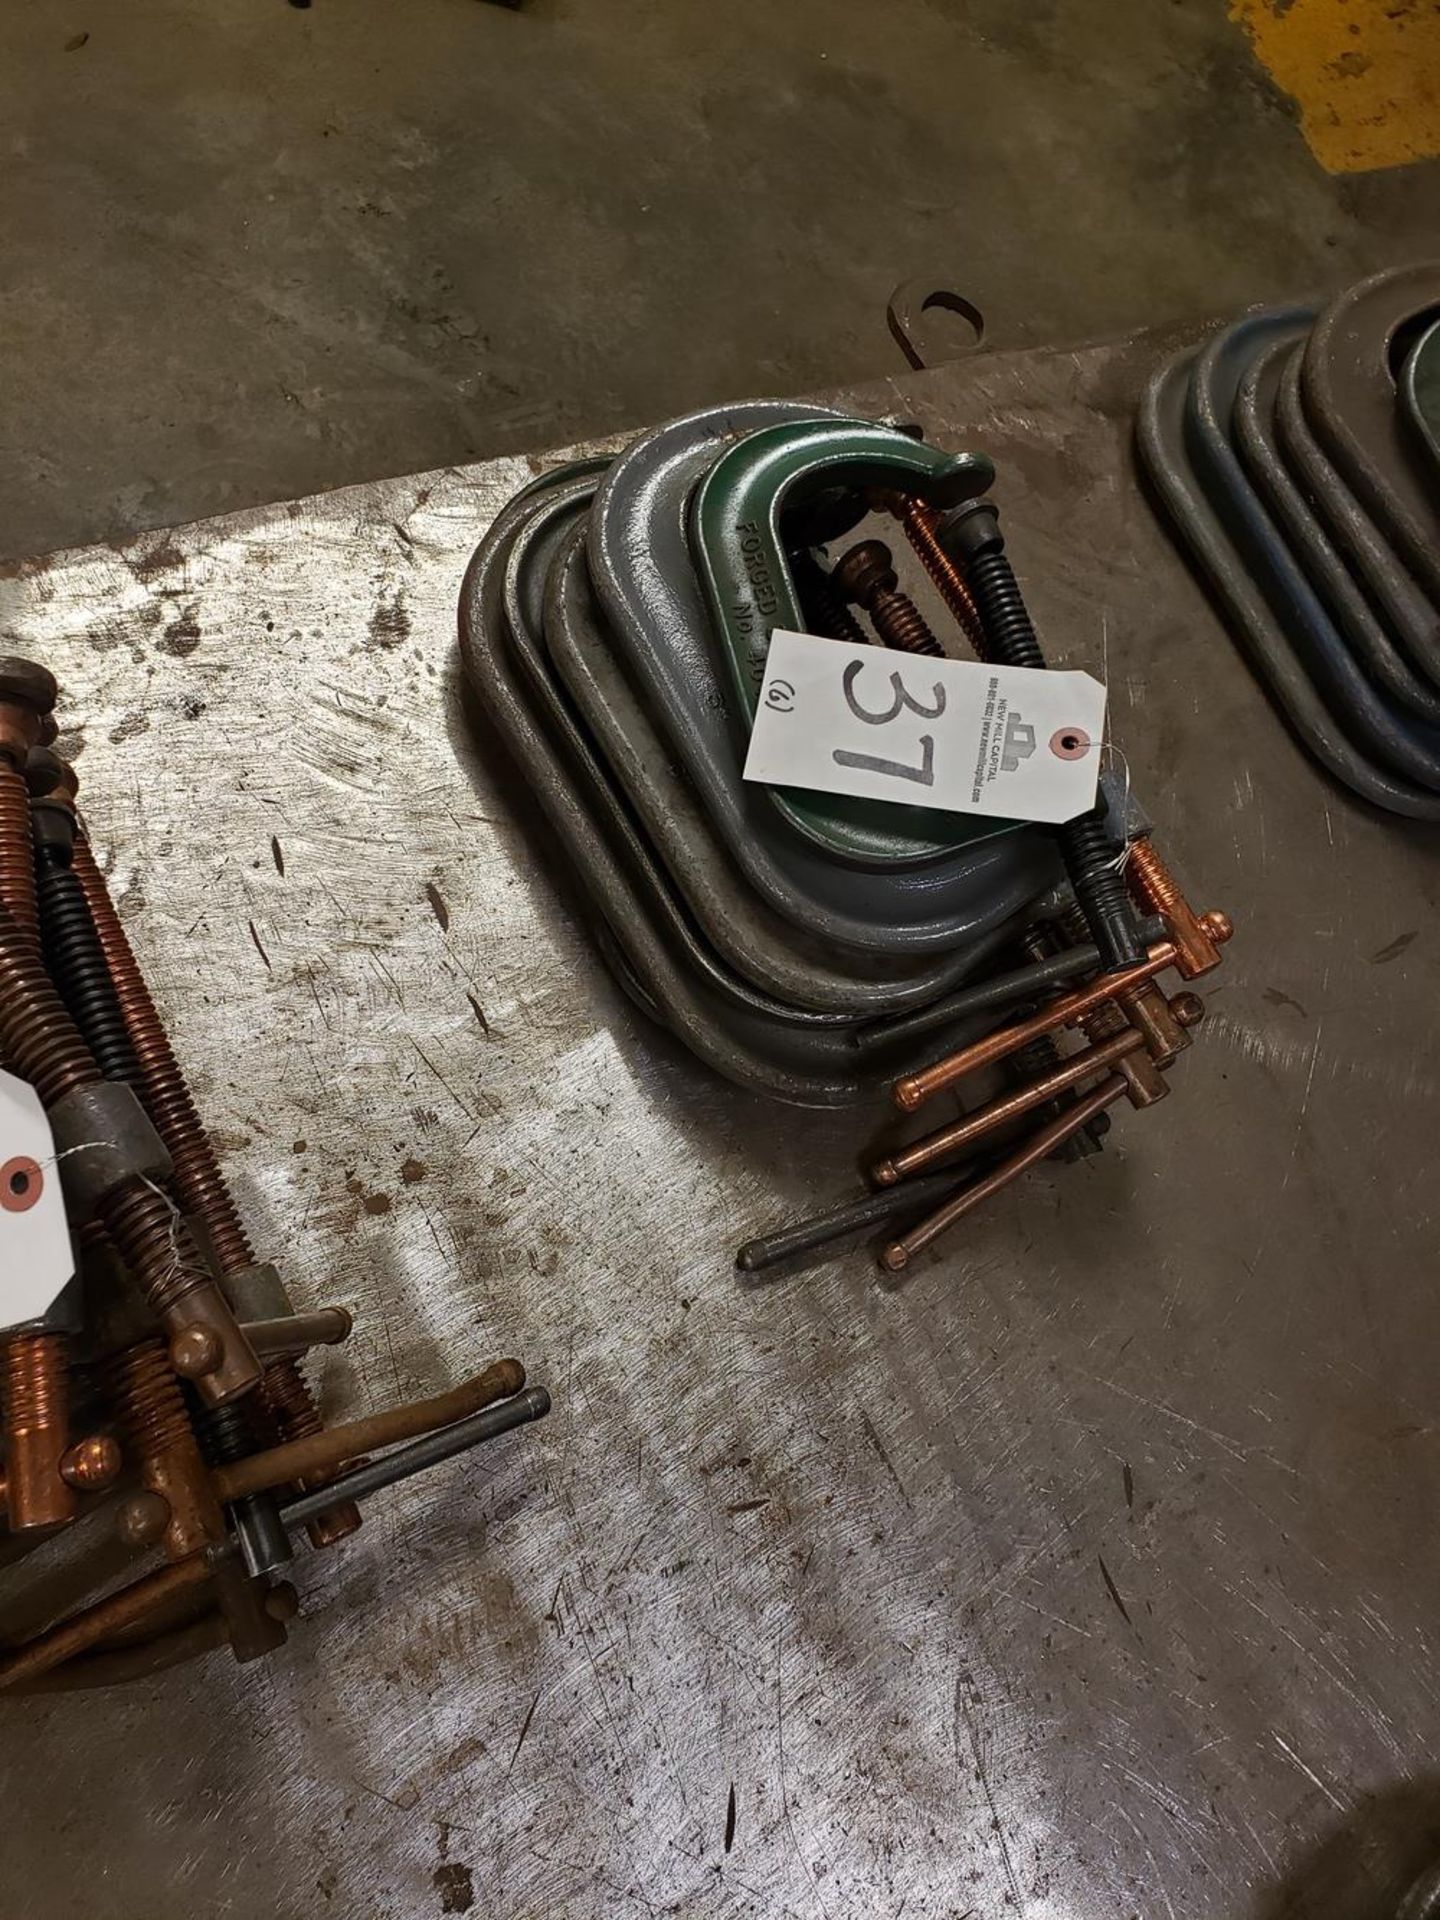 Lot of (6) C-Clamps | Rig Fee: $10